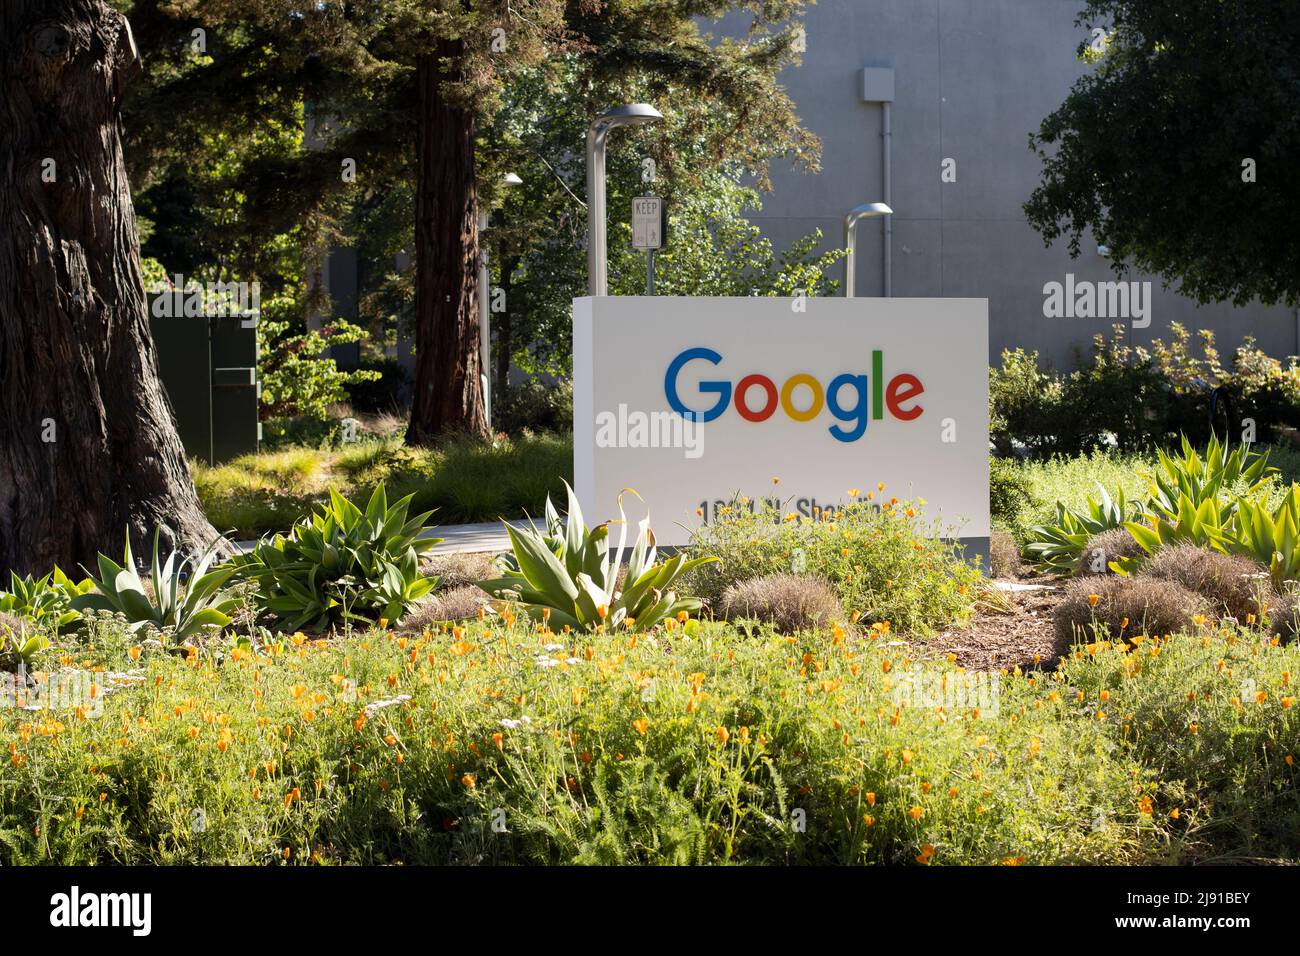 Google logo is seen at the entrance to an office building in the Google headquarters campus in Mountain View, California, on Wednesday, May 4, 2022. Stock Photo